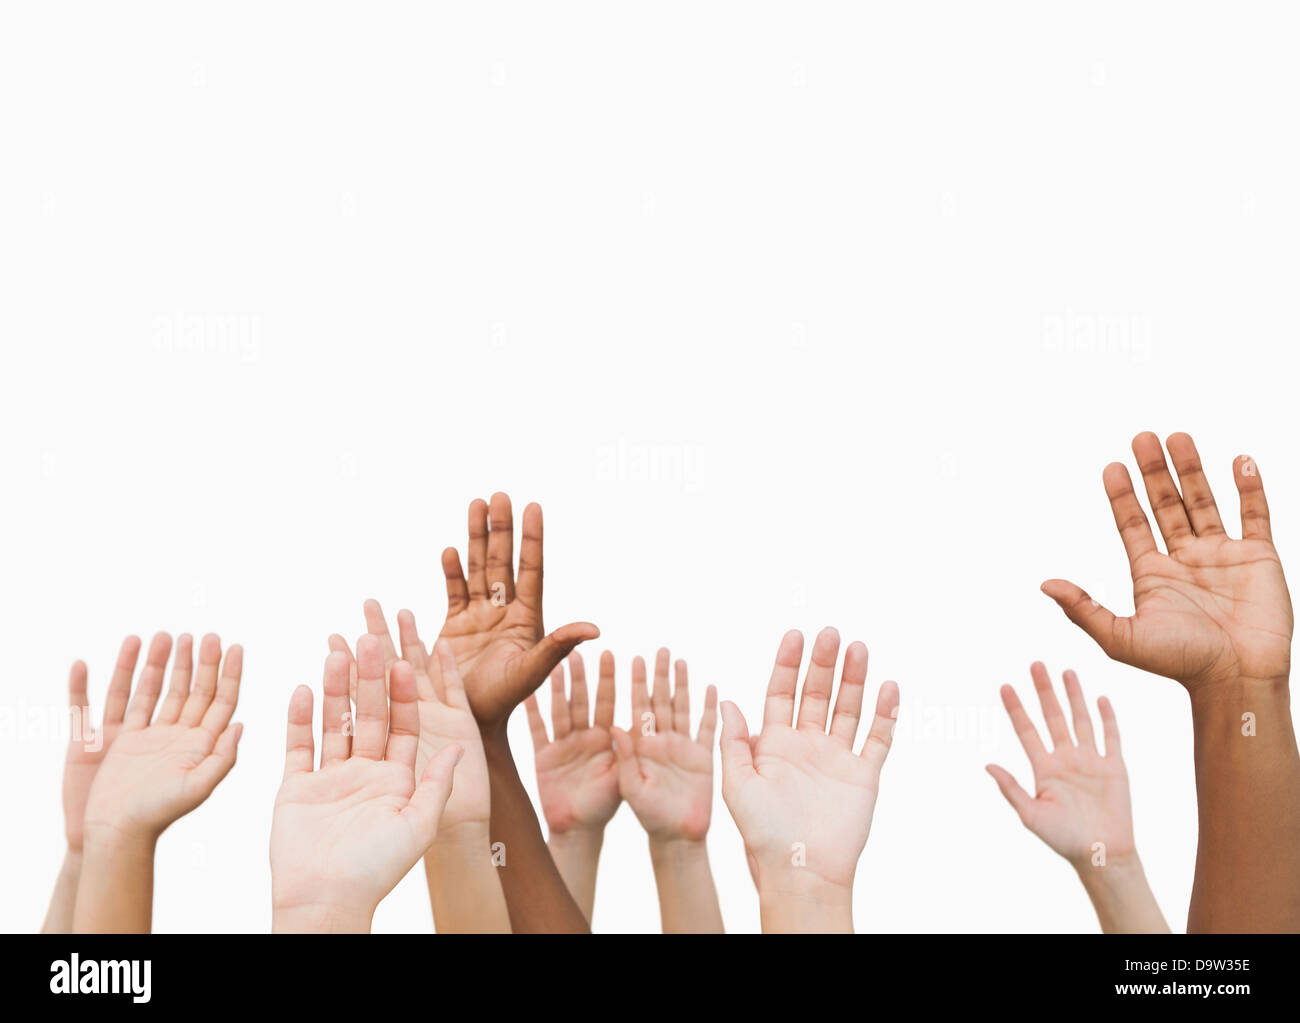 Hands raising in the air Stock Photo